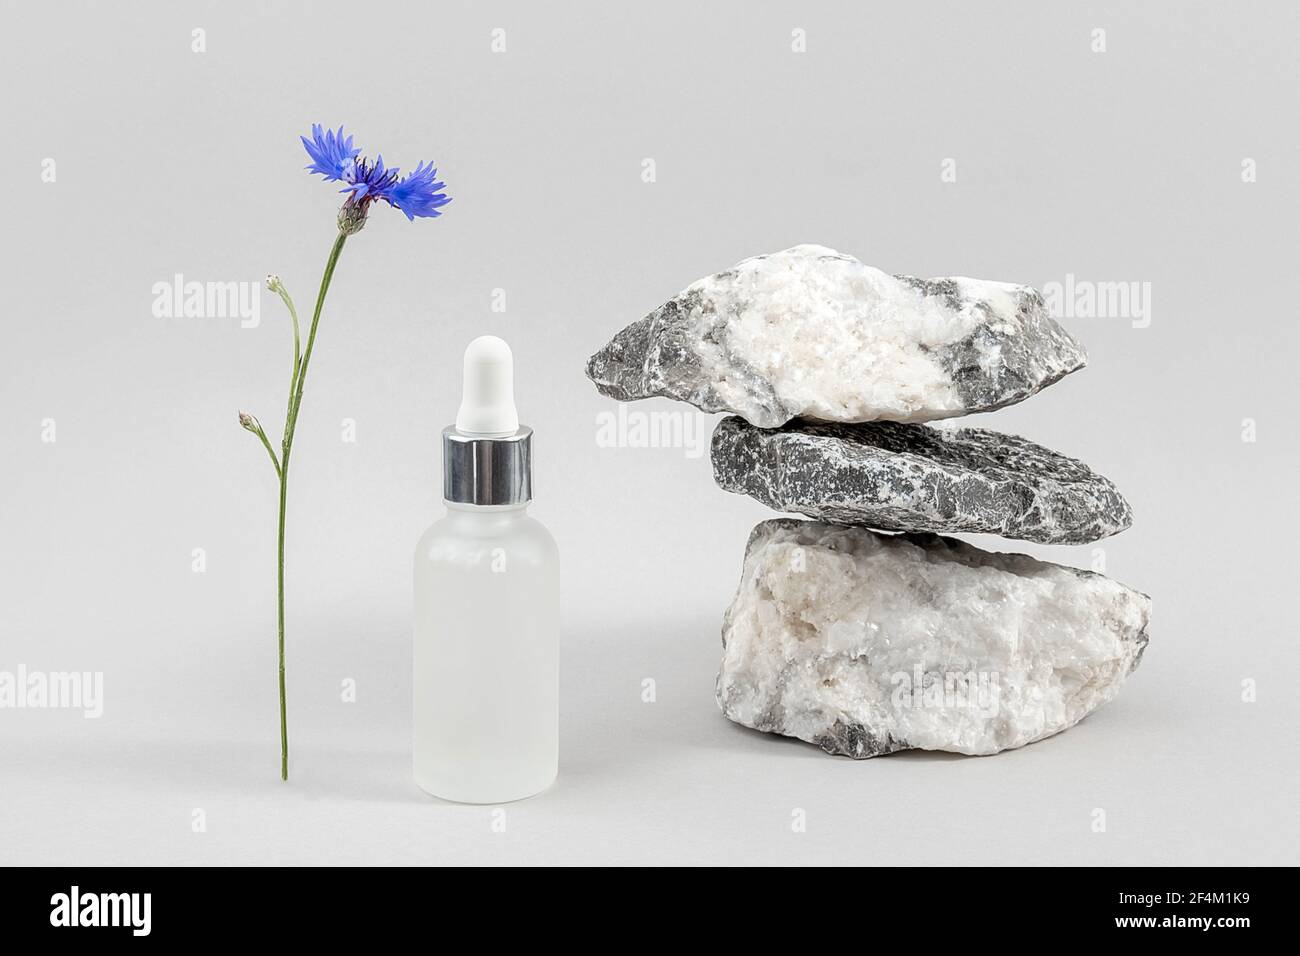 Anti-aging collagen, facial serum in transparent glass bottle with pipette on pile of stones and blue cornflower flower against grey background. Natur Stock Photo